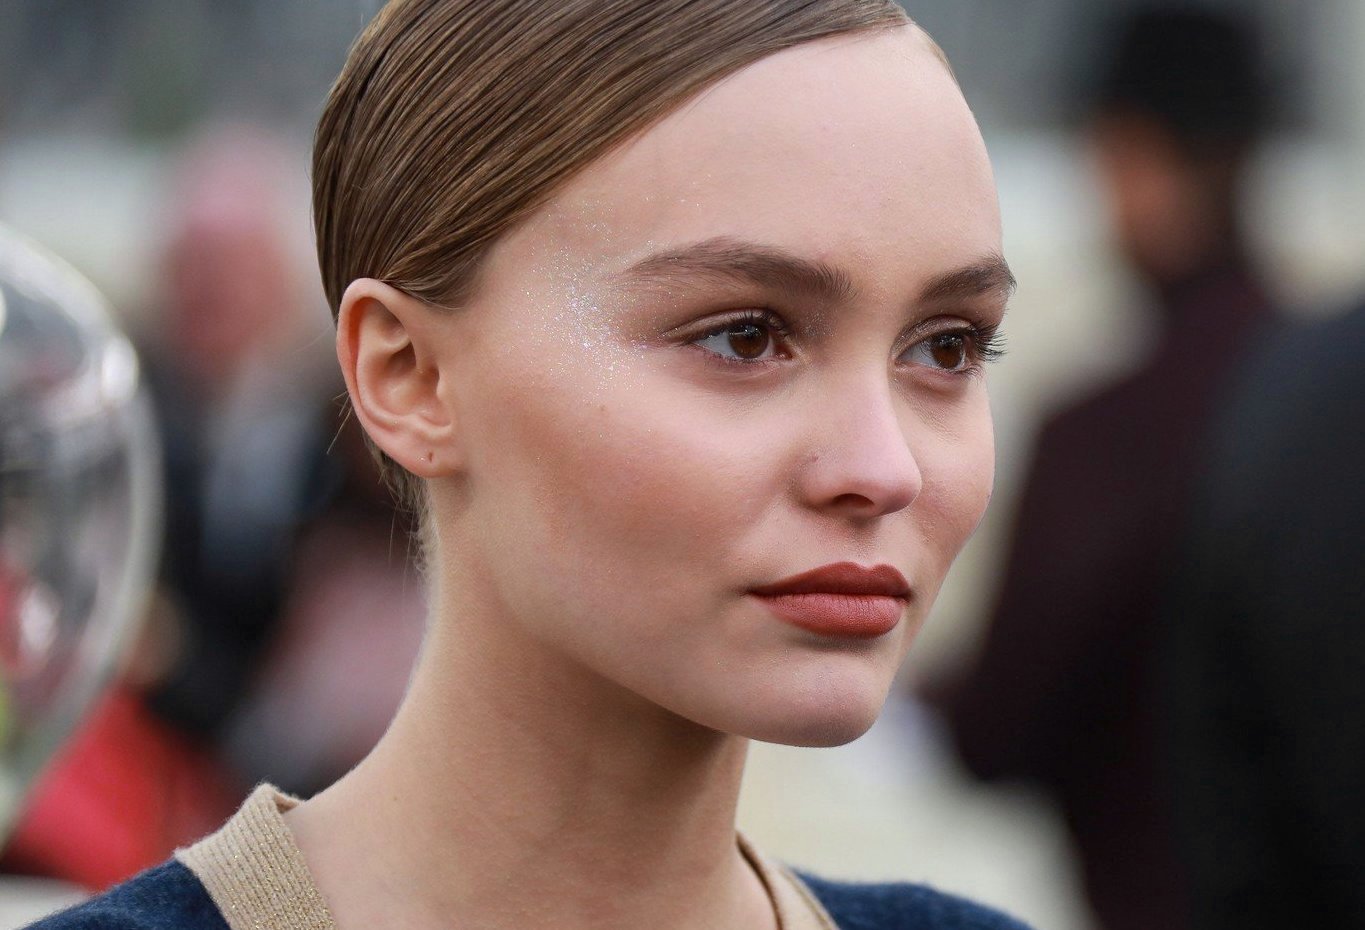 Lily-Rose Depp during the Chanel Haute Couture Spring Summer 2017 show as part of Paris Fashion Week on January 24, 2017 in Paris, France. //VULAURENT_152045/Credit:LAURENT VU/SIPA/1701241532, Image: 312887181, License: Rights-managed, Restrictions: , Model Release: no, Credit line: Profimedia, TEMP Sipa Press